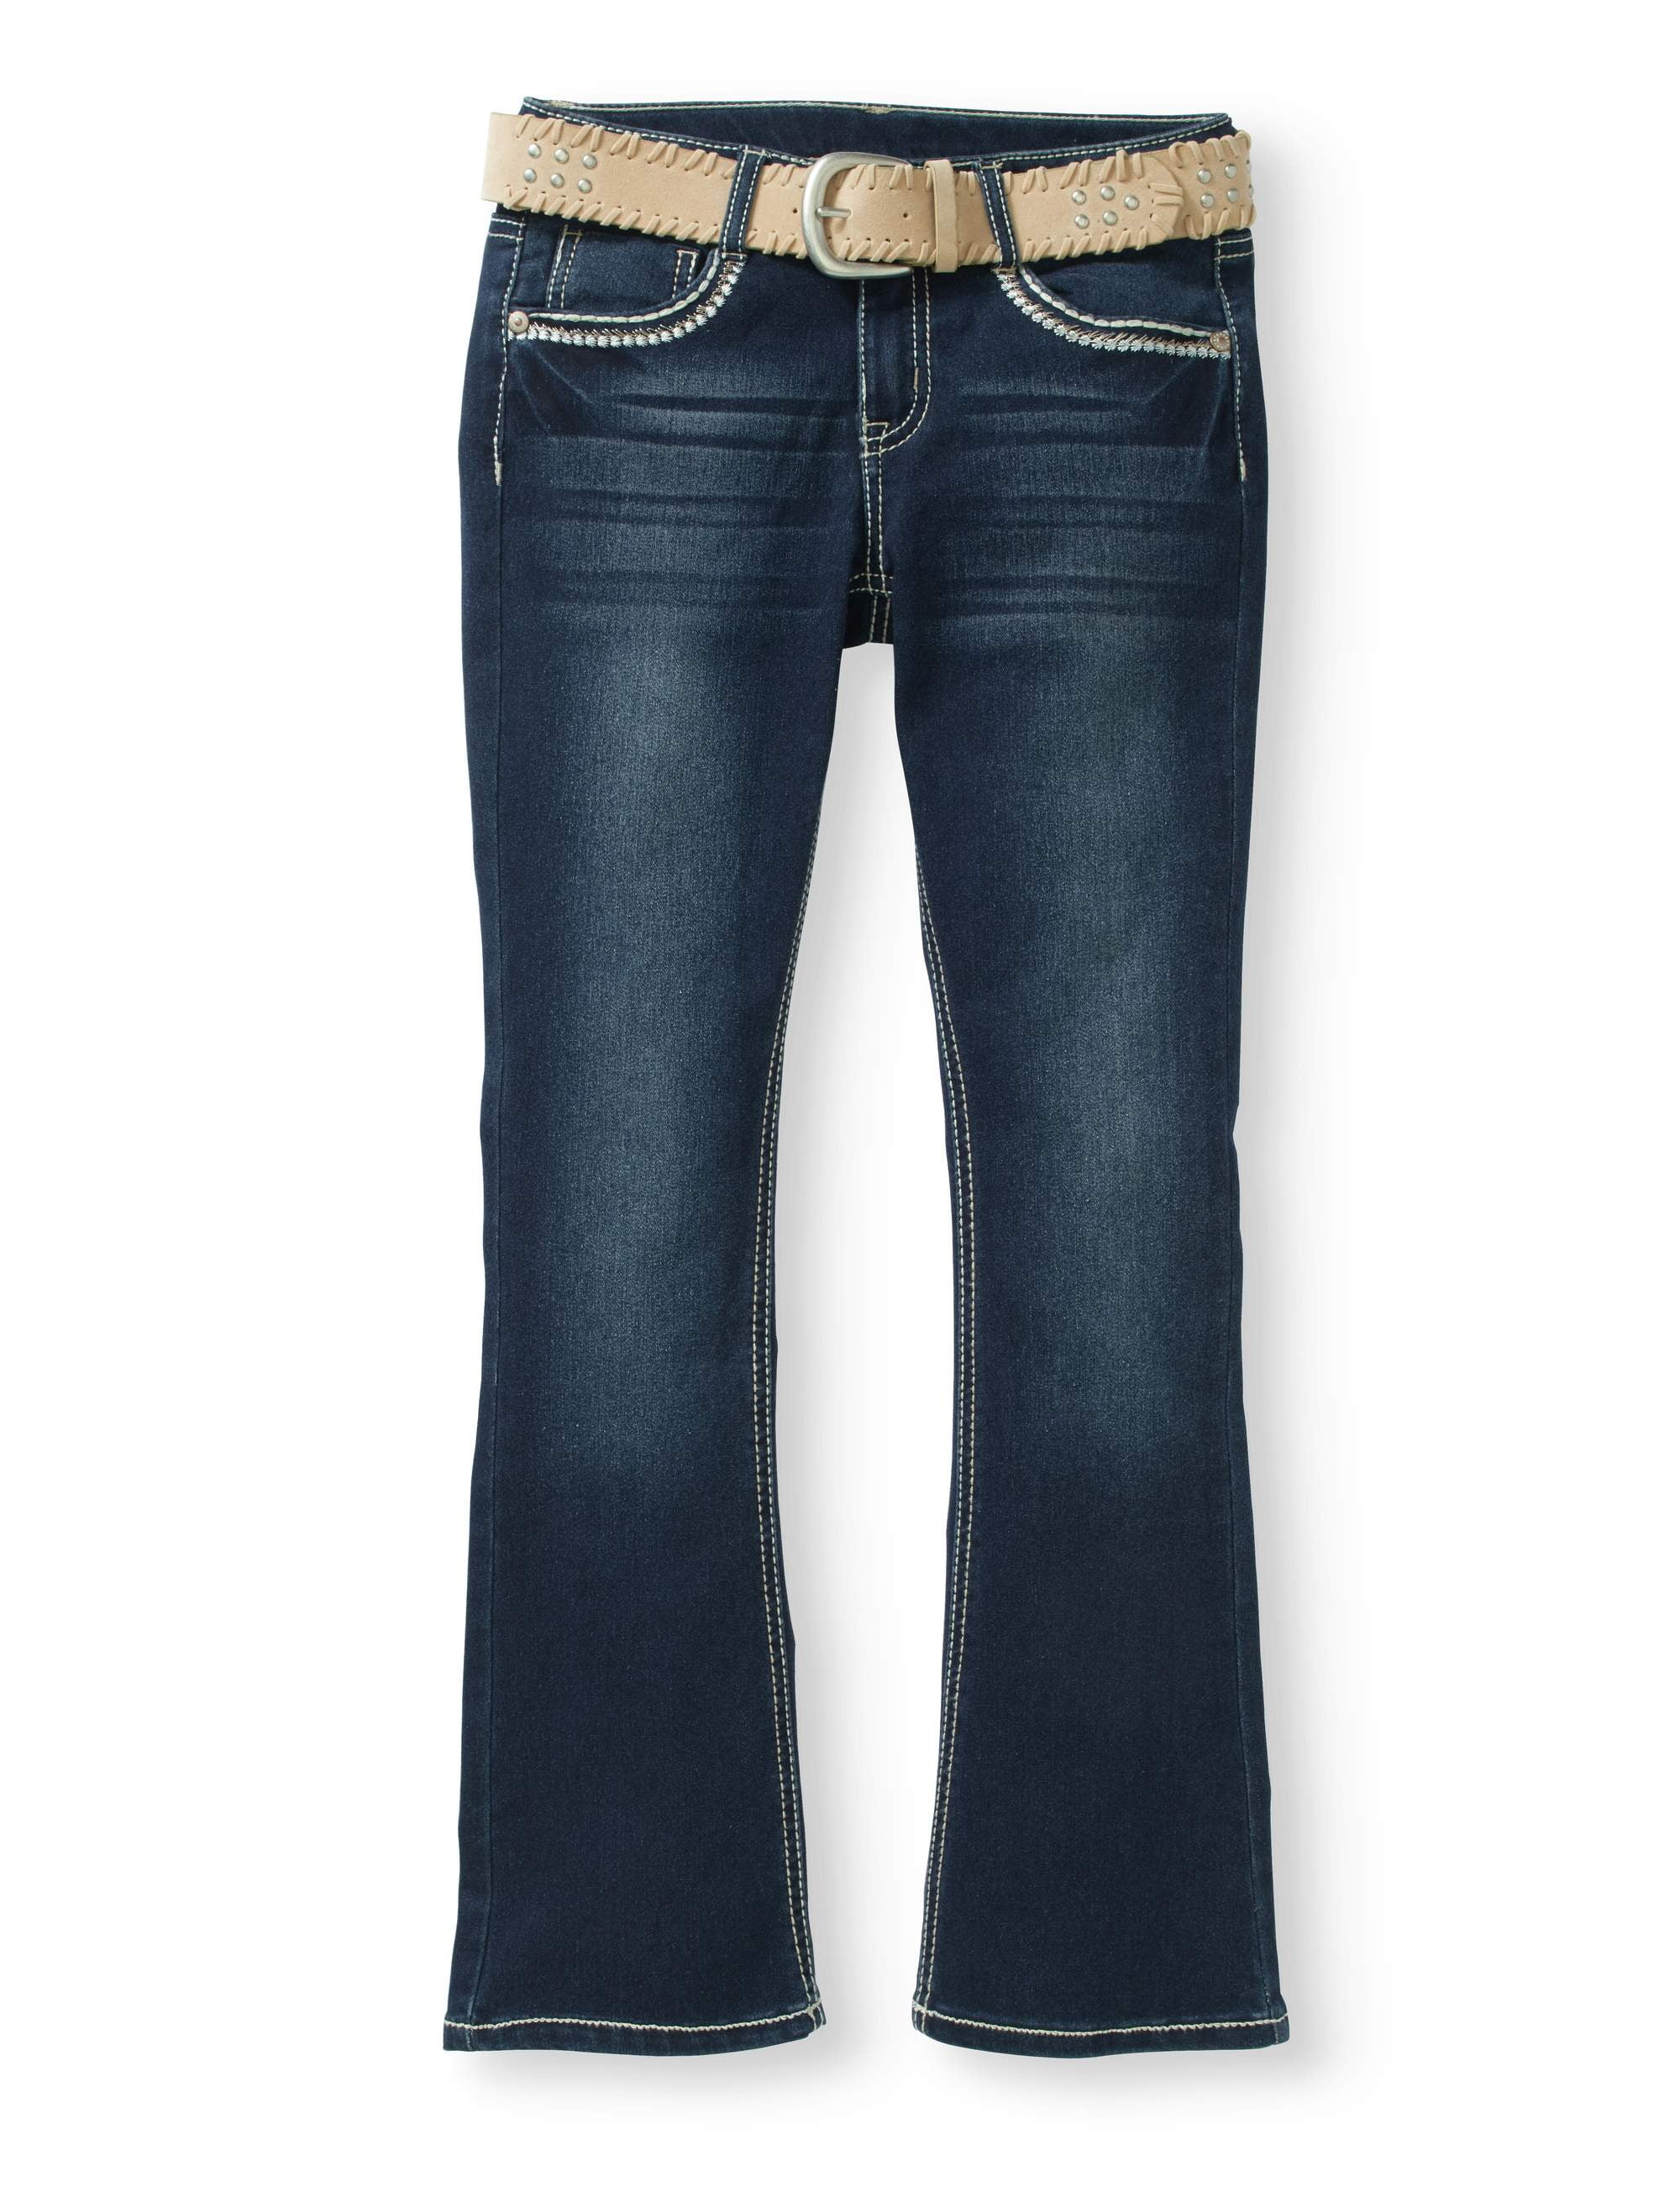 faded glory jeans bootcut